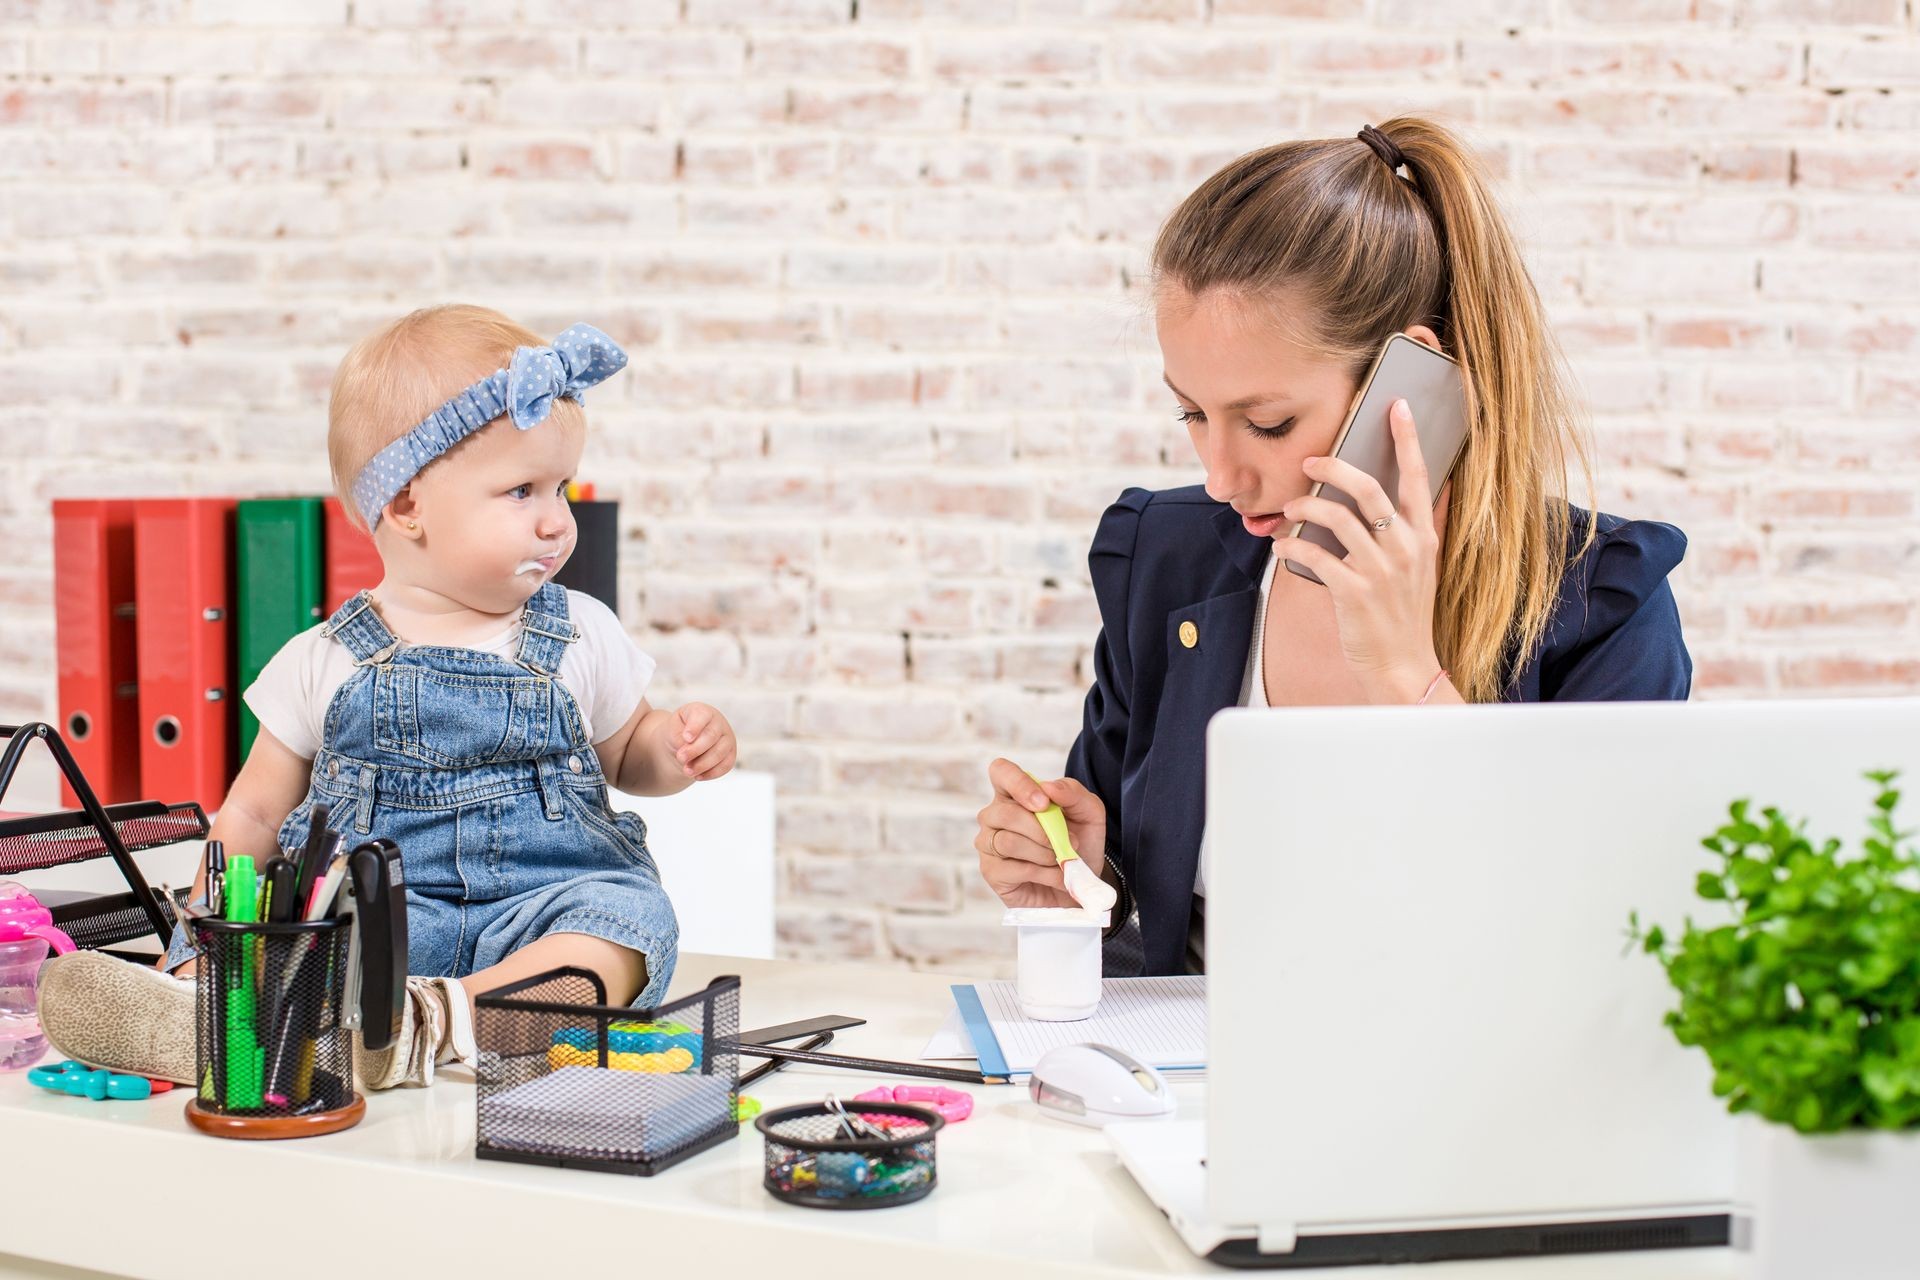 Family Business - telecommute Businesswoman and mother with kid is making a phone call